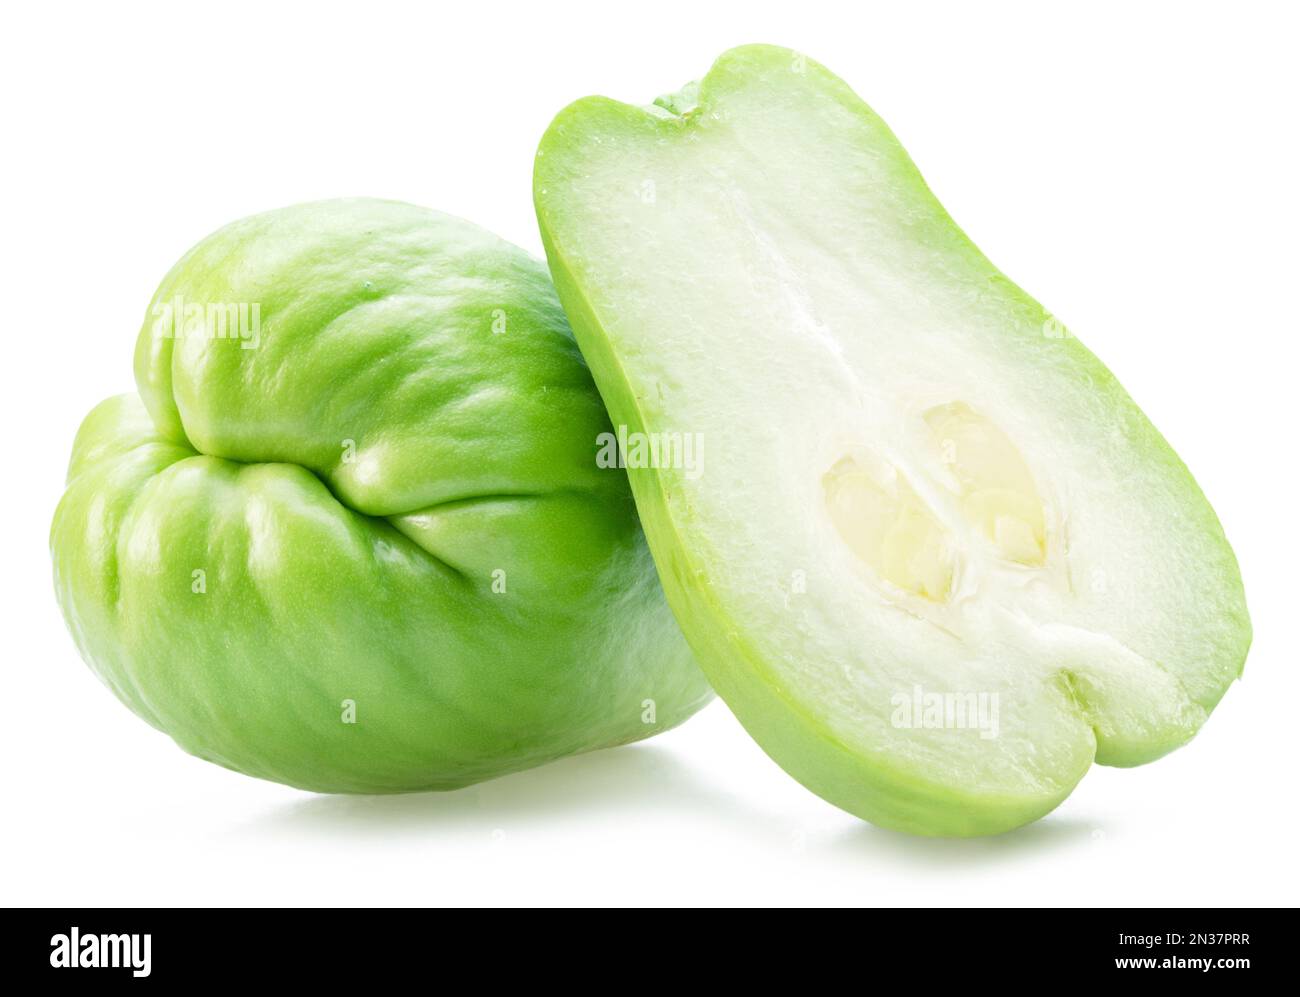 Chayote fruit and half of chayote fruit isolated on white background. Stock Photo